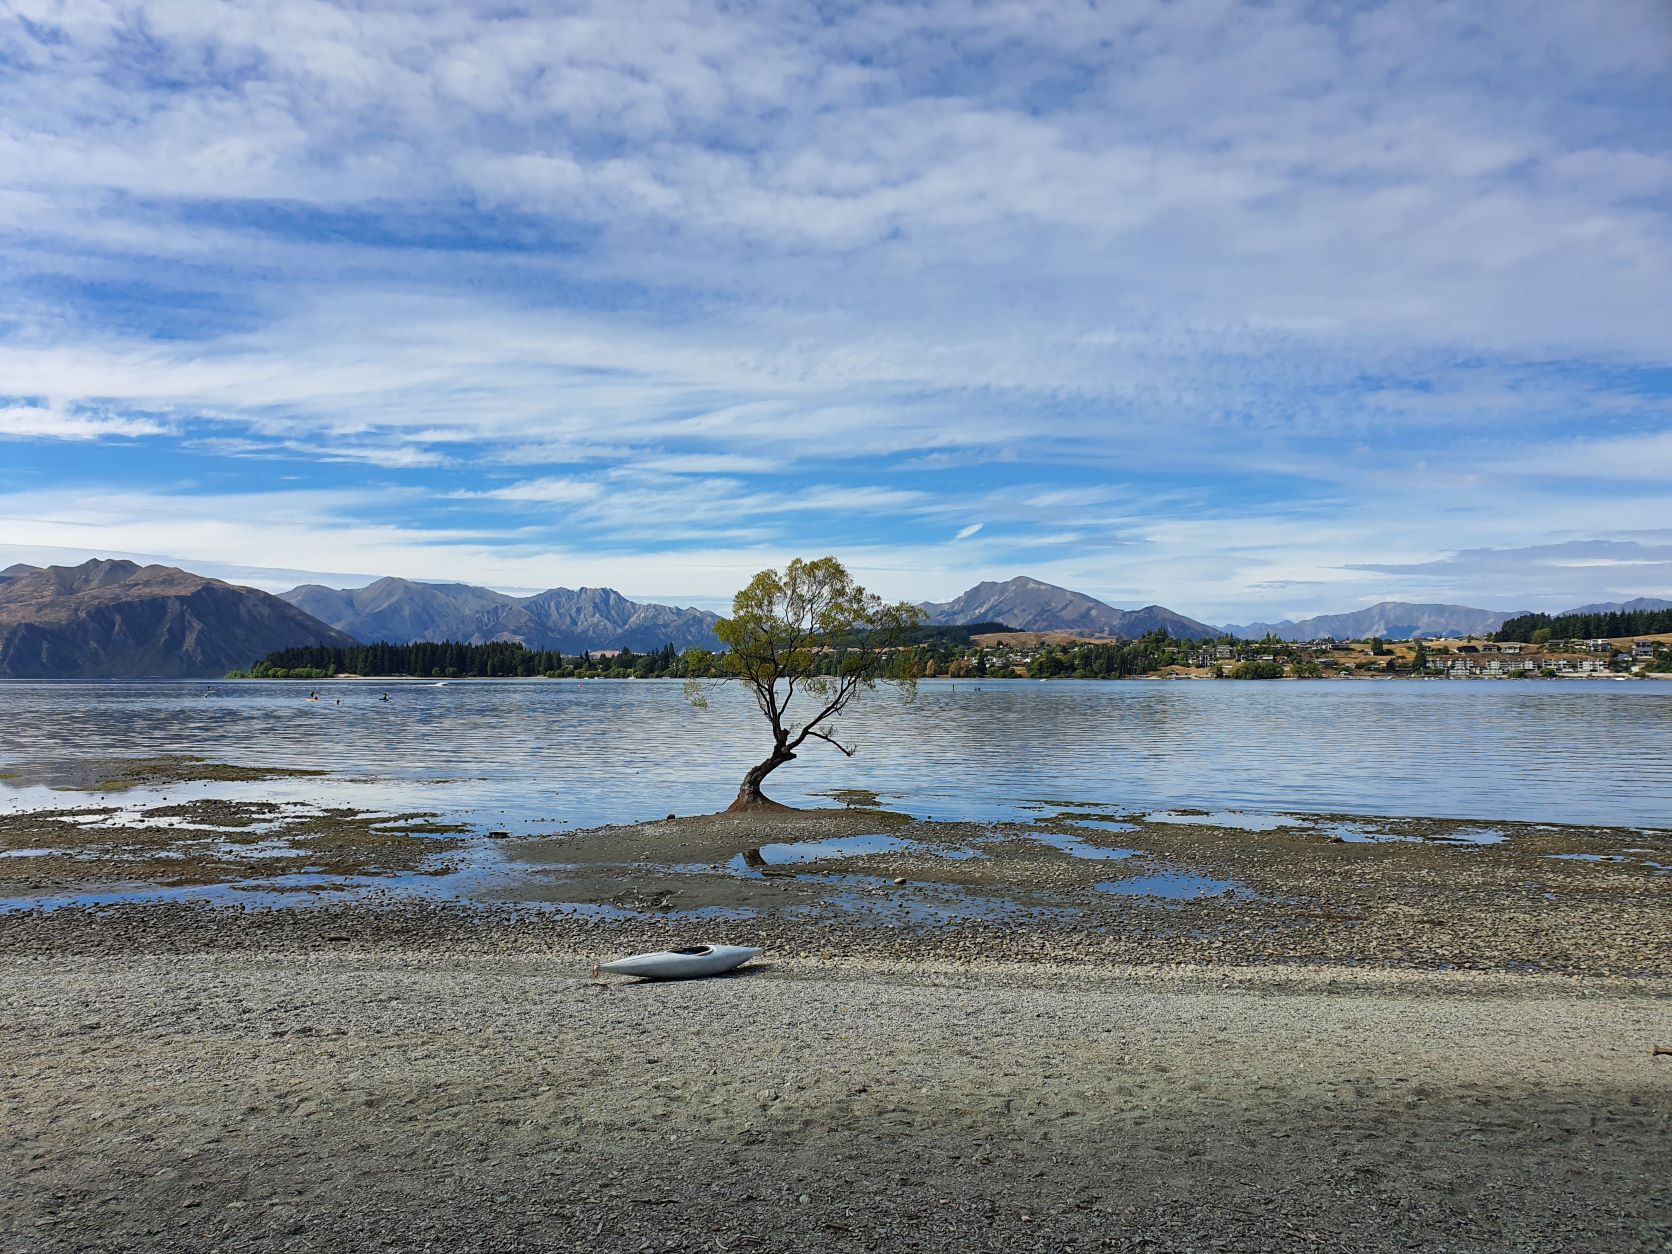 The famous Wanaka tree in the summer